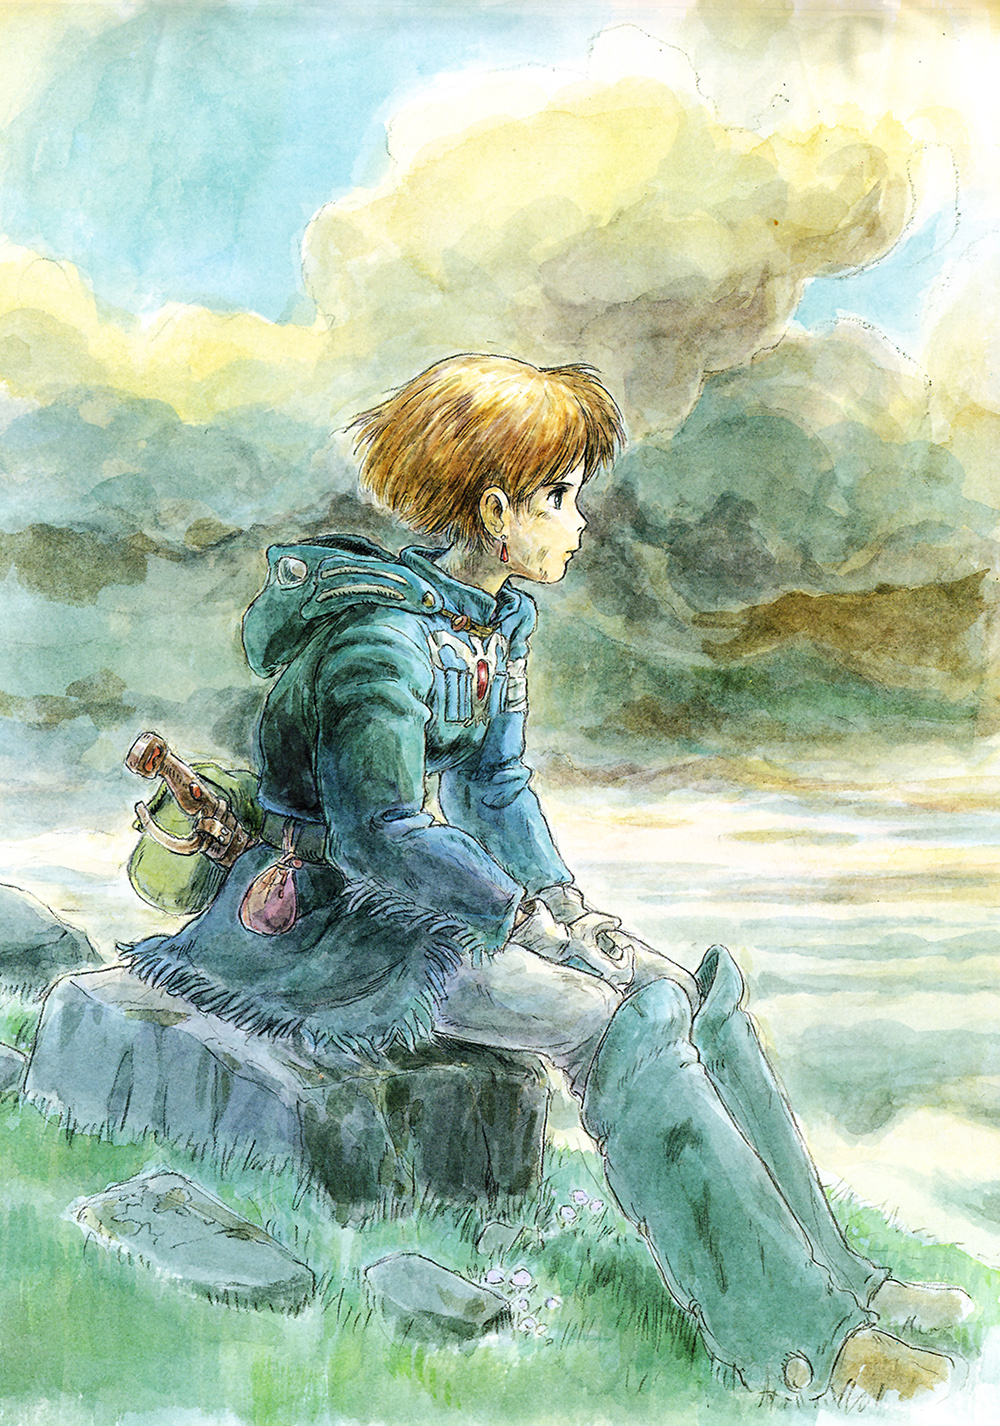 Nausicaä of the Valley of the Wind Picture